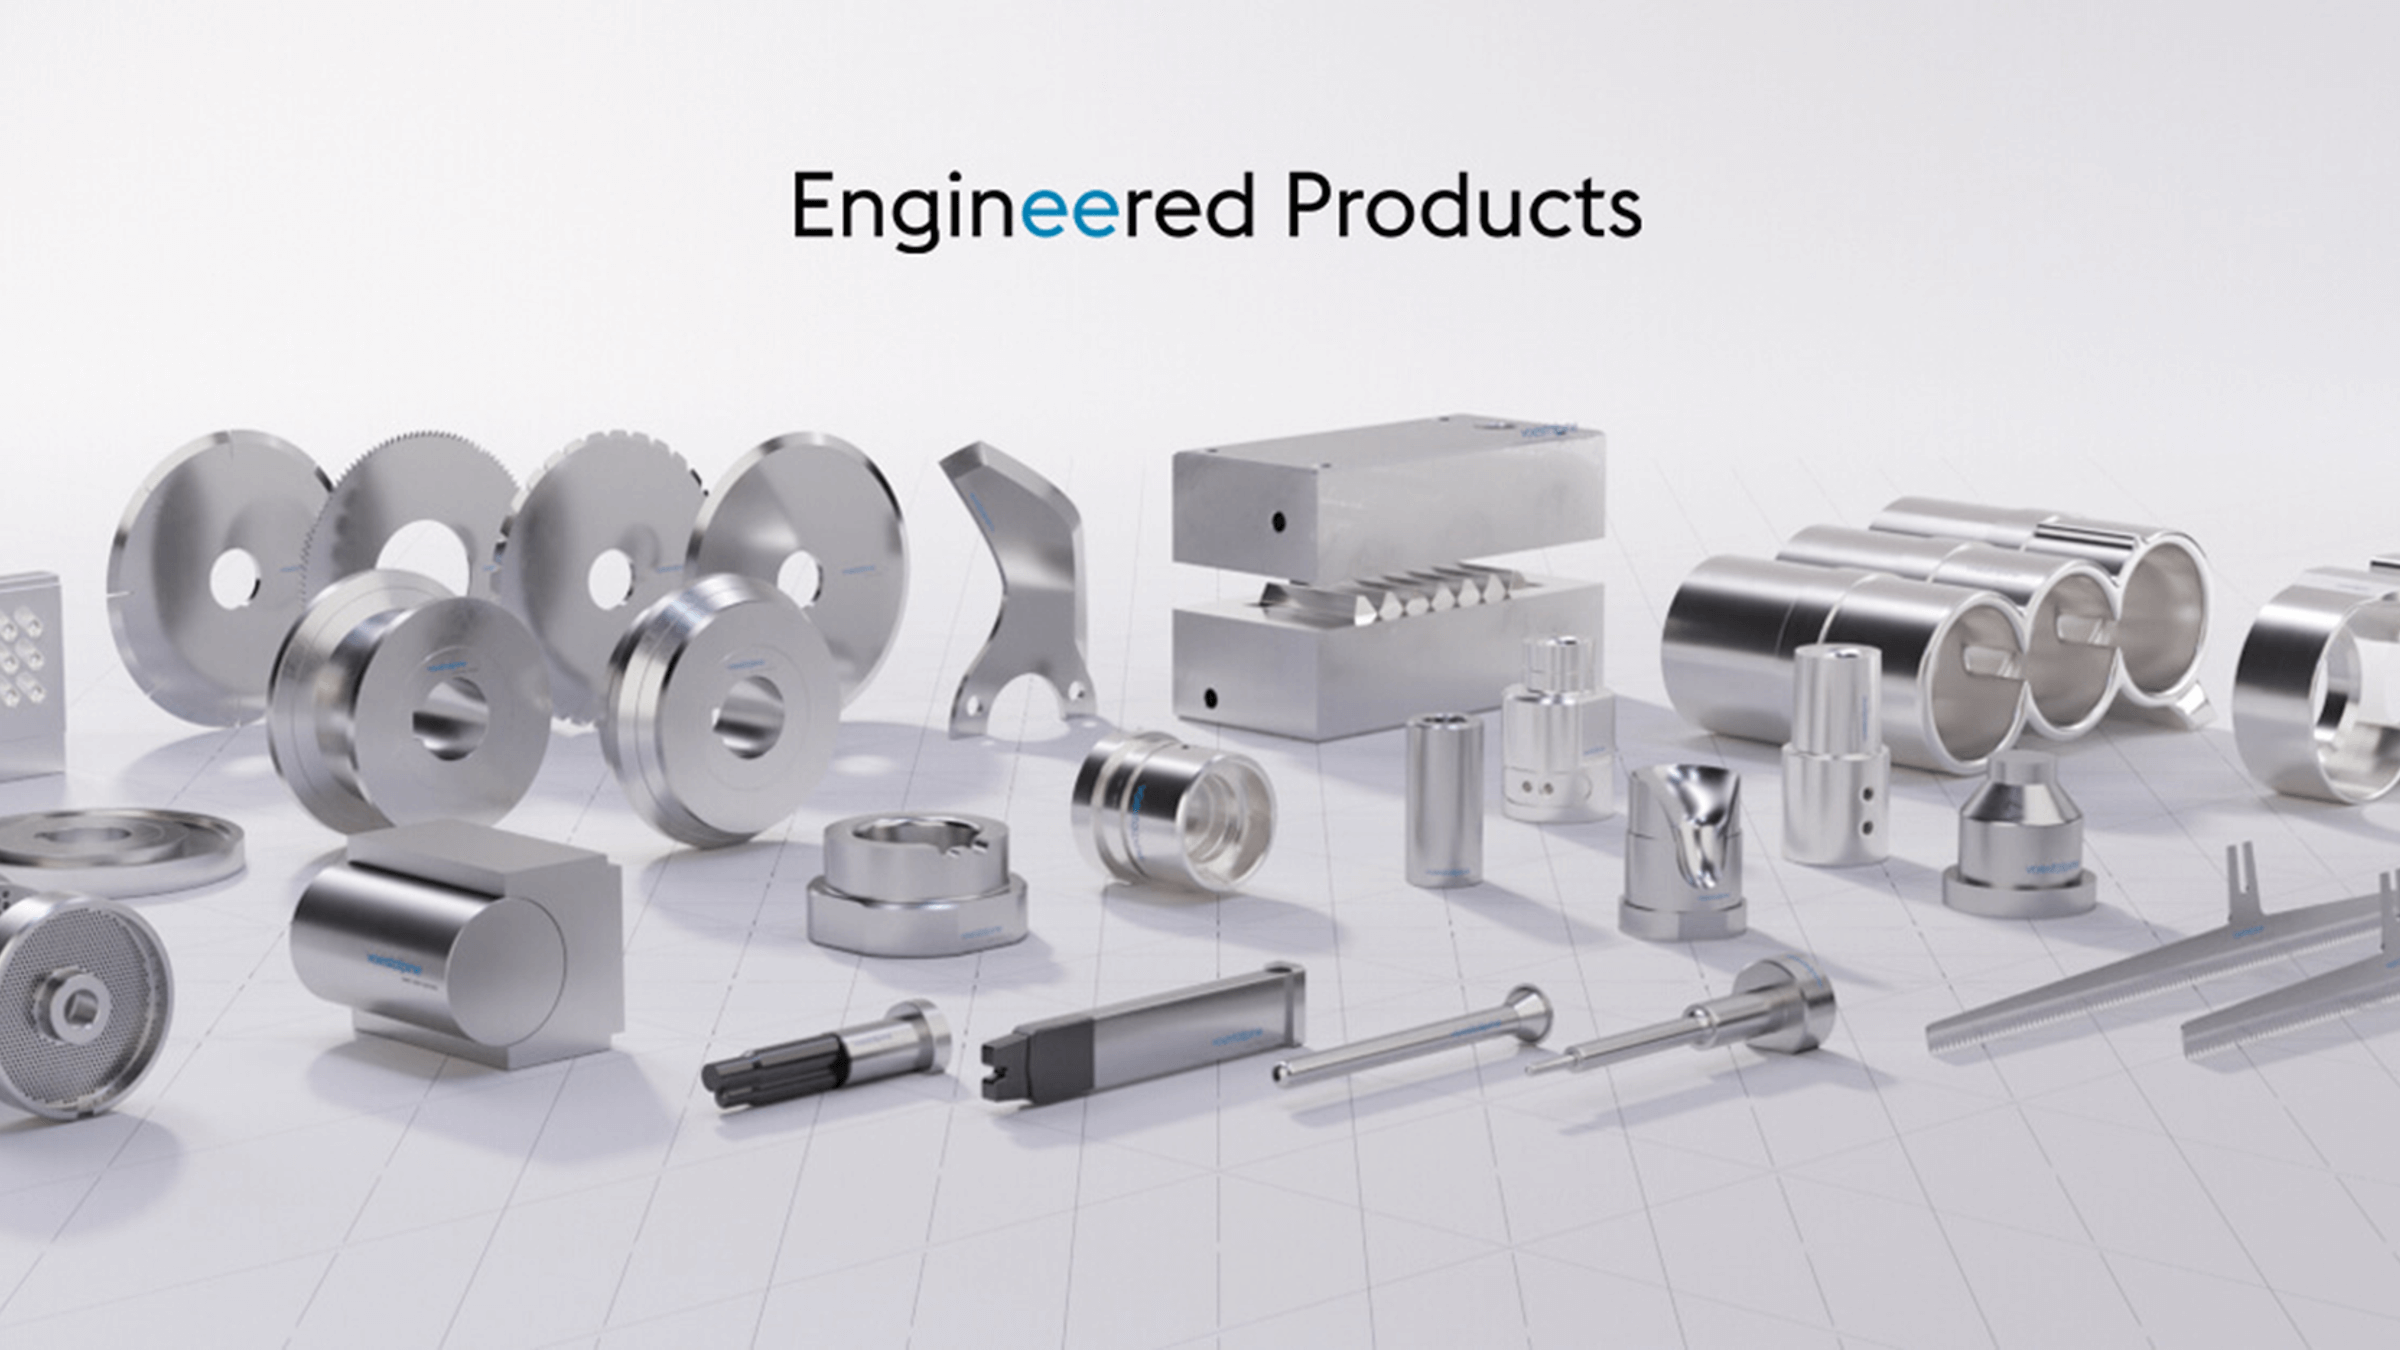 engineeredproducts_banner_1920x1080